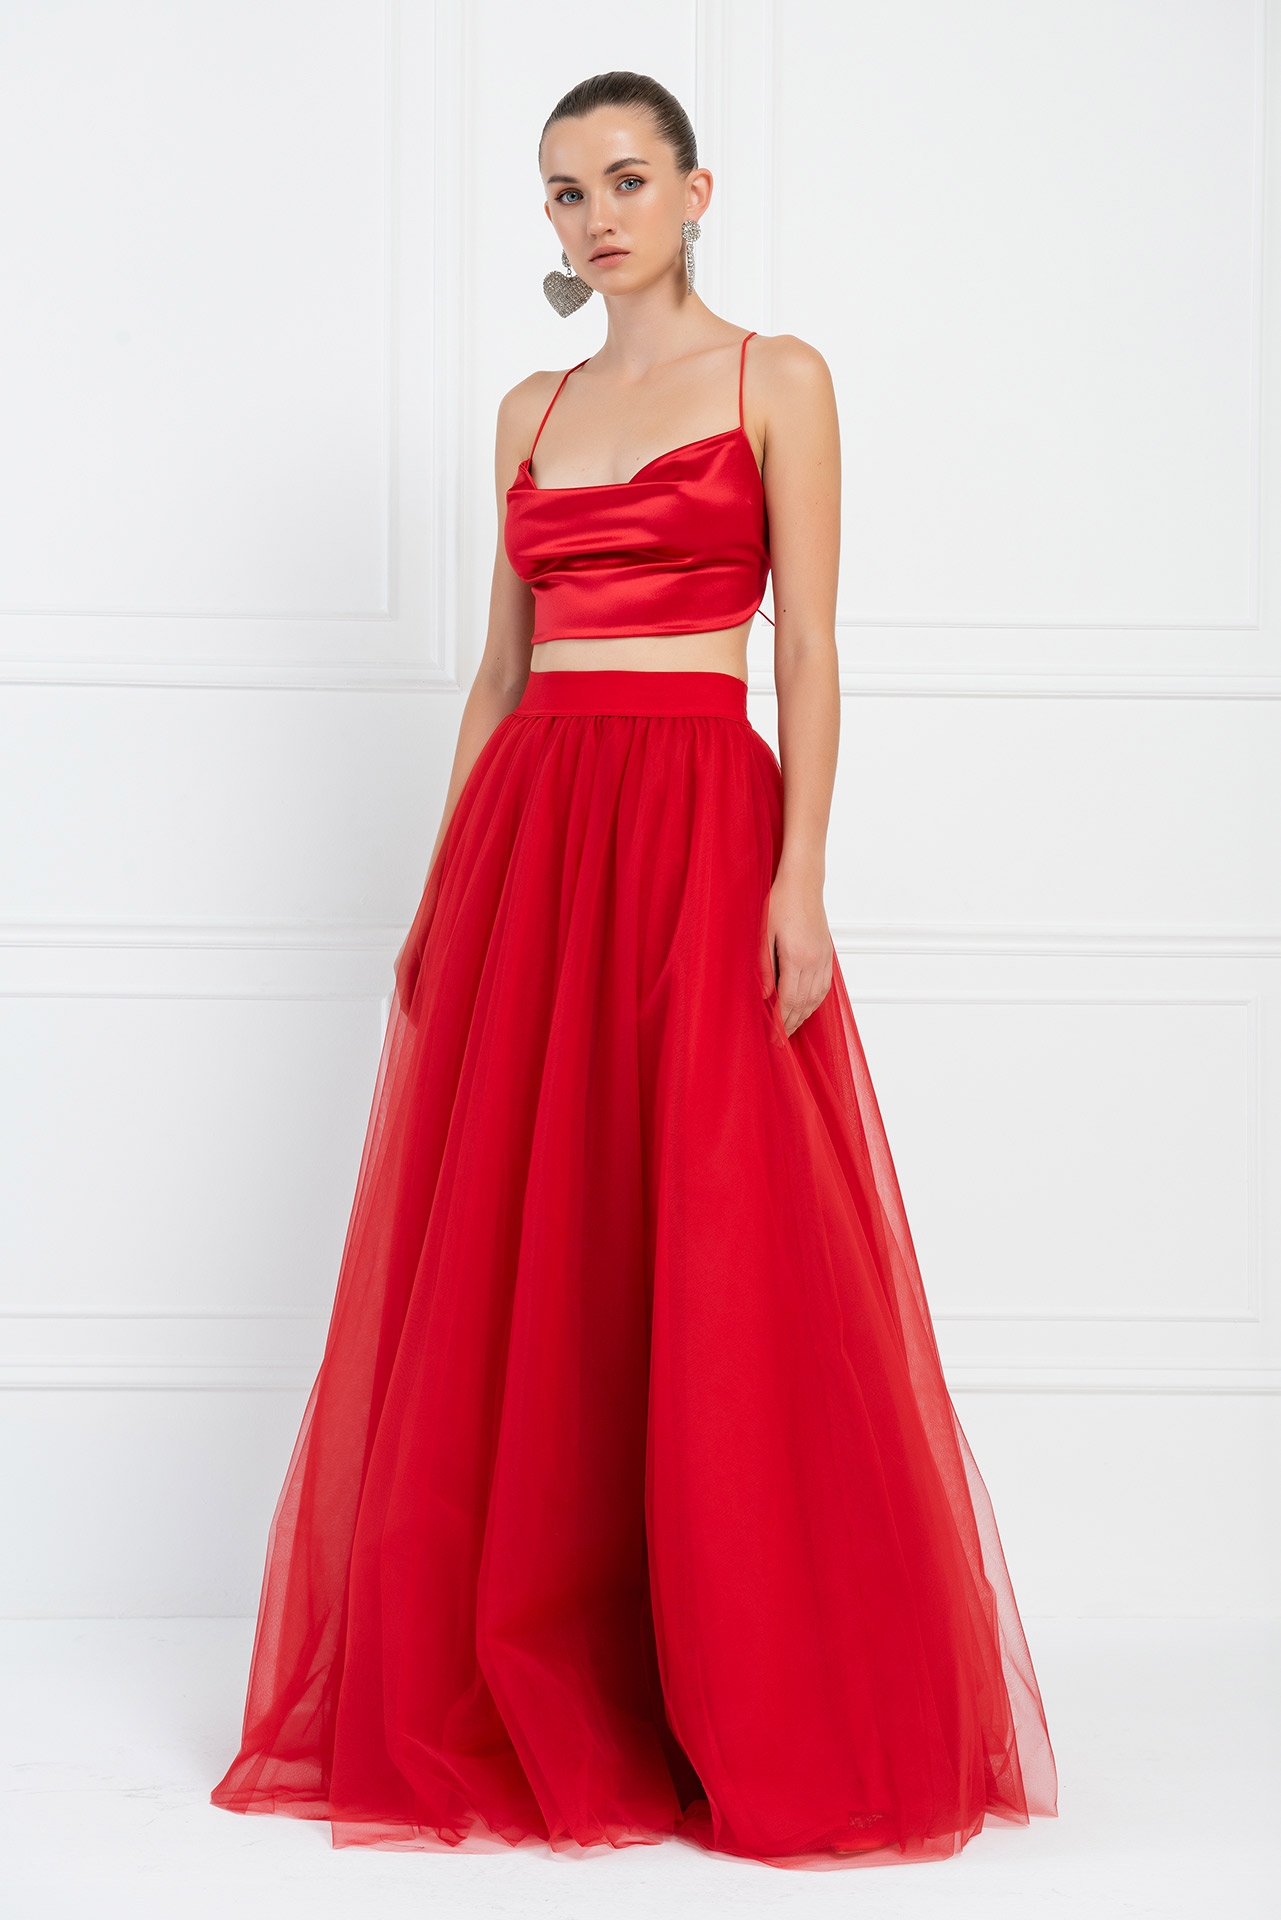 Red Tulle Maxi Skirt